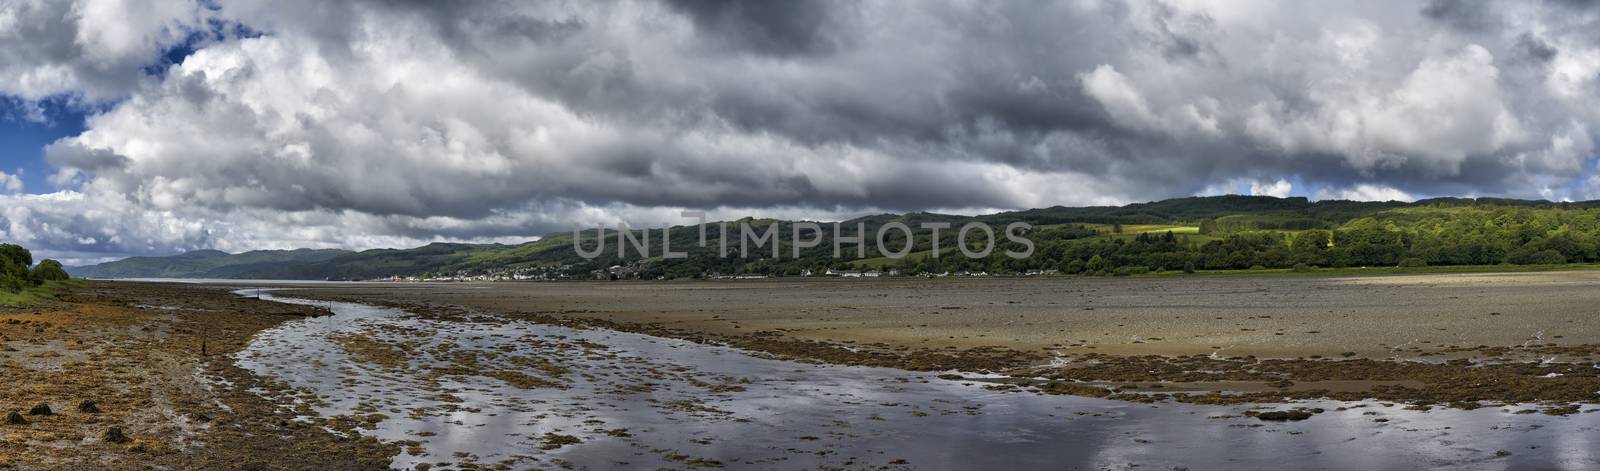 Panoramic view of Lochgilphead estuary at low tide looking out to Loch Gilp in Ayrshire on West coast of Scotland